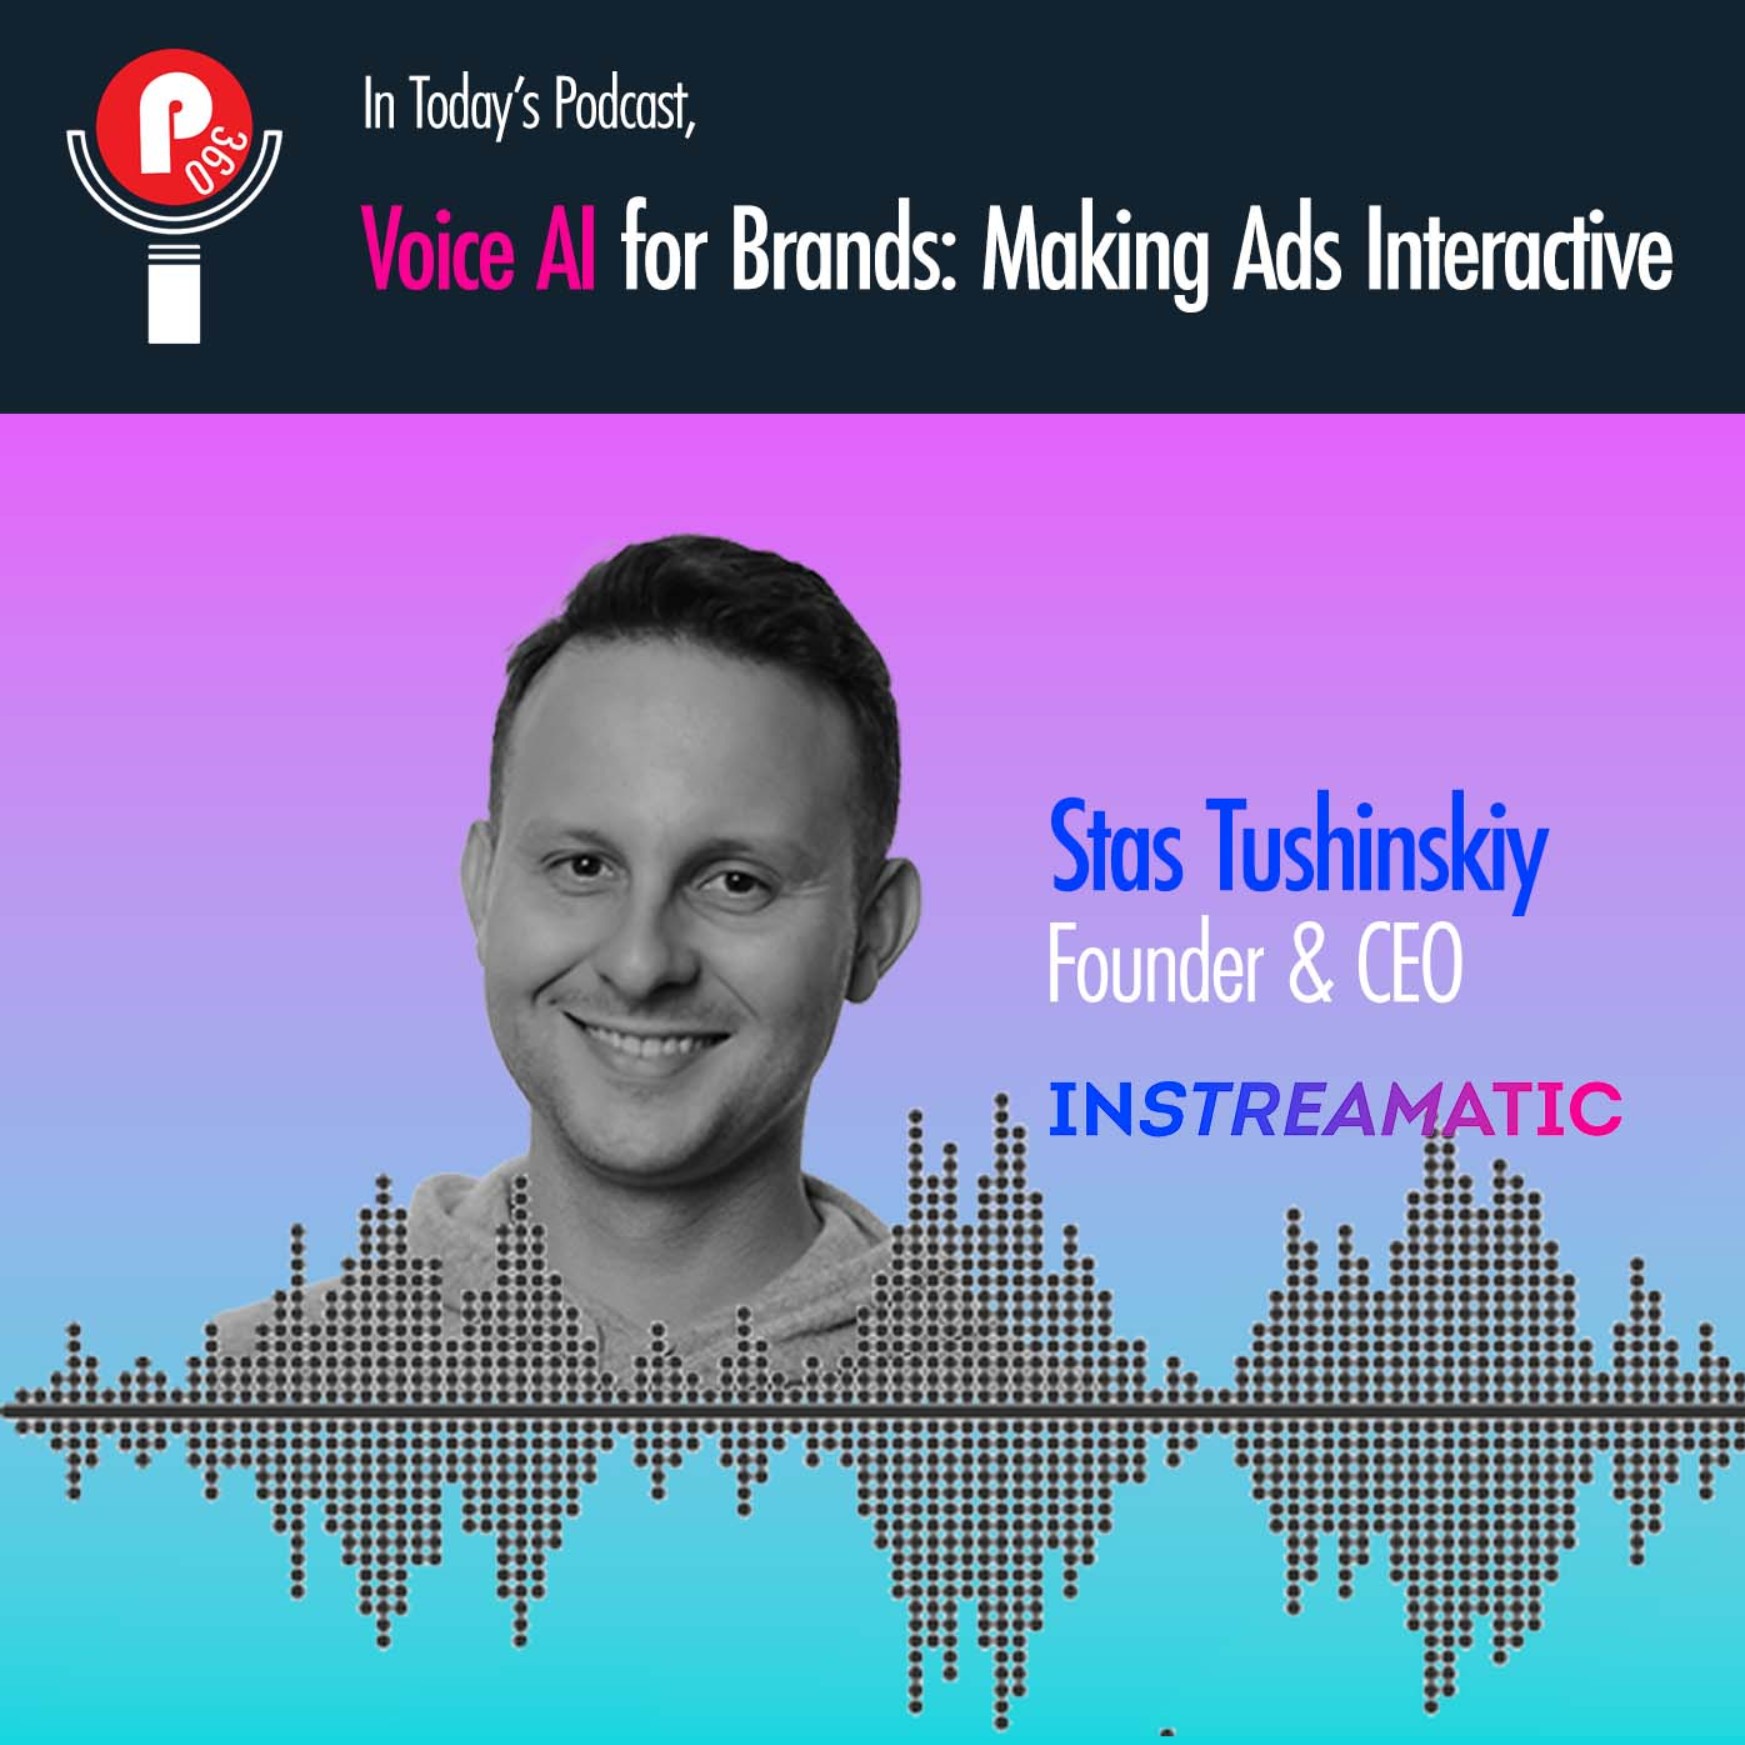 Voice AI for Brands: Making Ads Interactive - Stas Tushinskiy,  Instreamatic Image